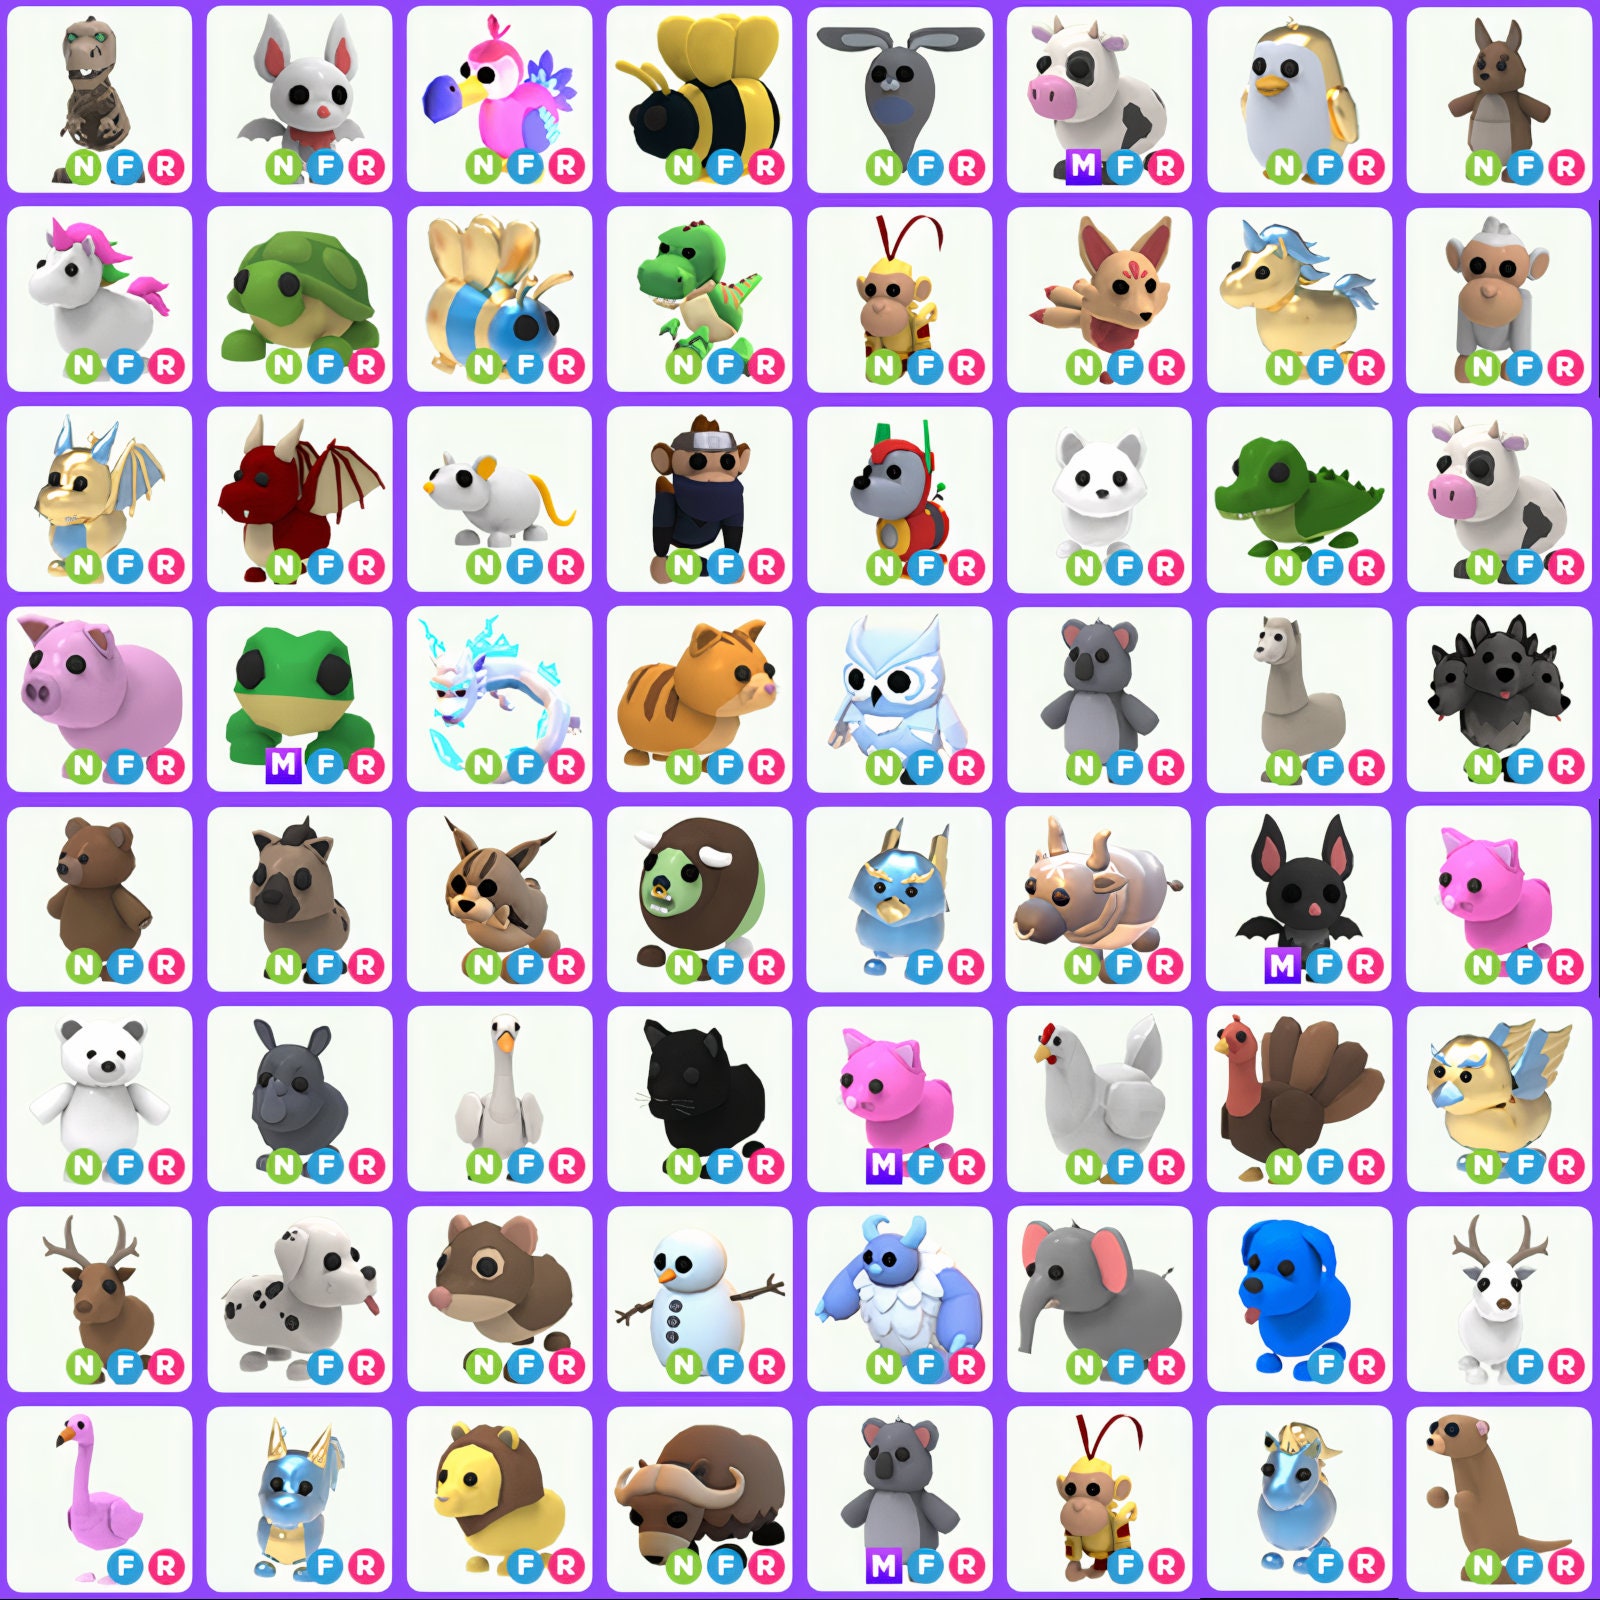 all the new dino pets in adopt me